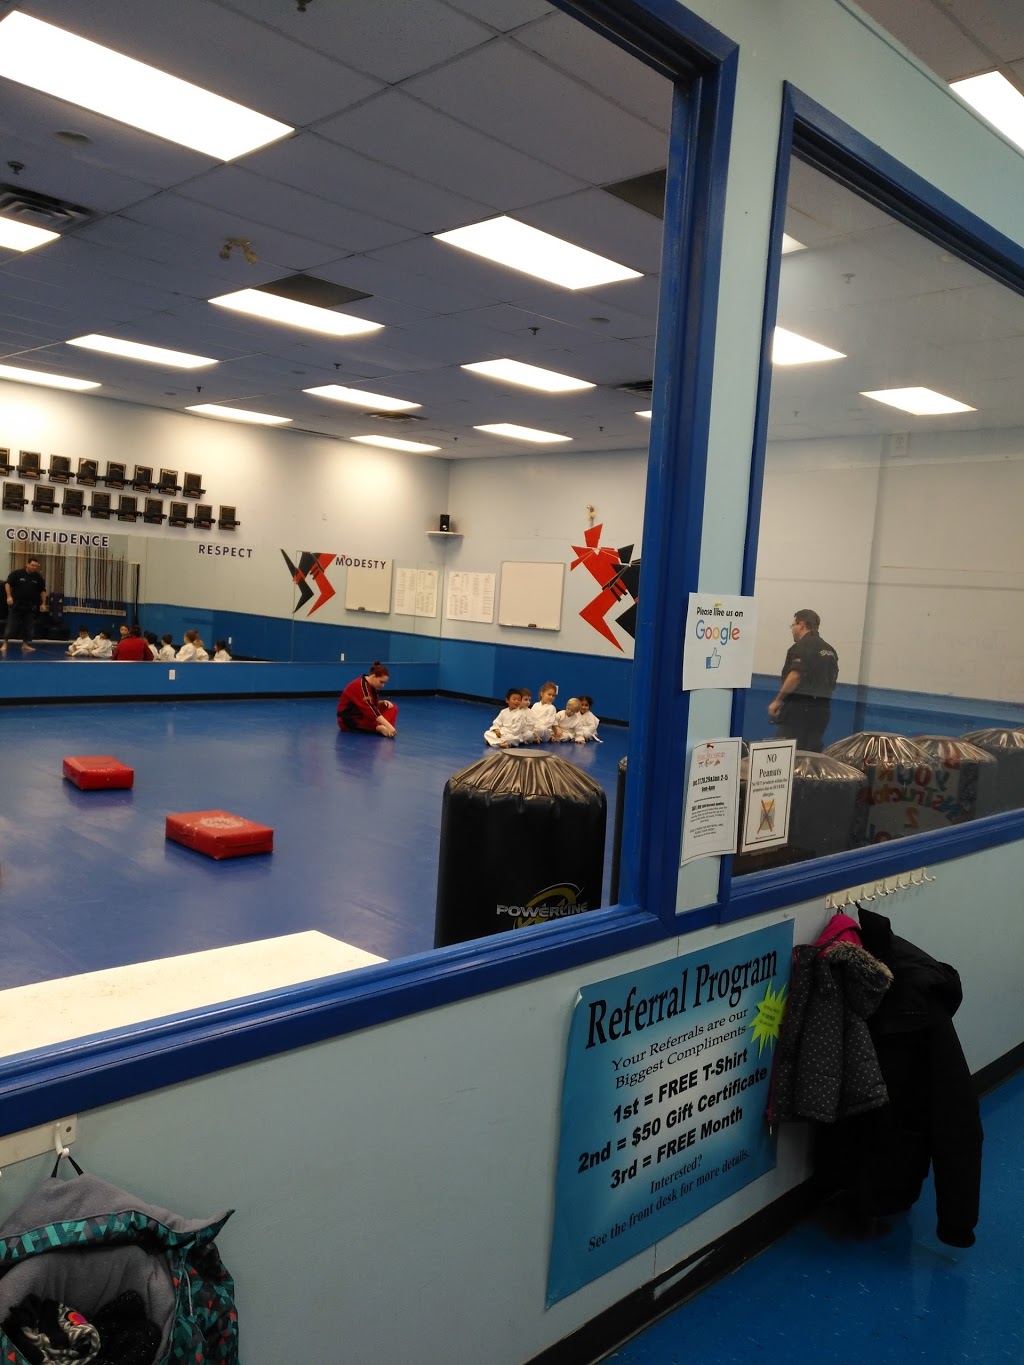 United Family Martial Arts | health | 3055 Dundas St W, Mississauga, ON L5L 3R8, Canada | 9056089222 OR +1 905-608-9222